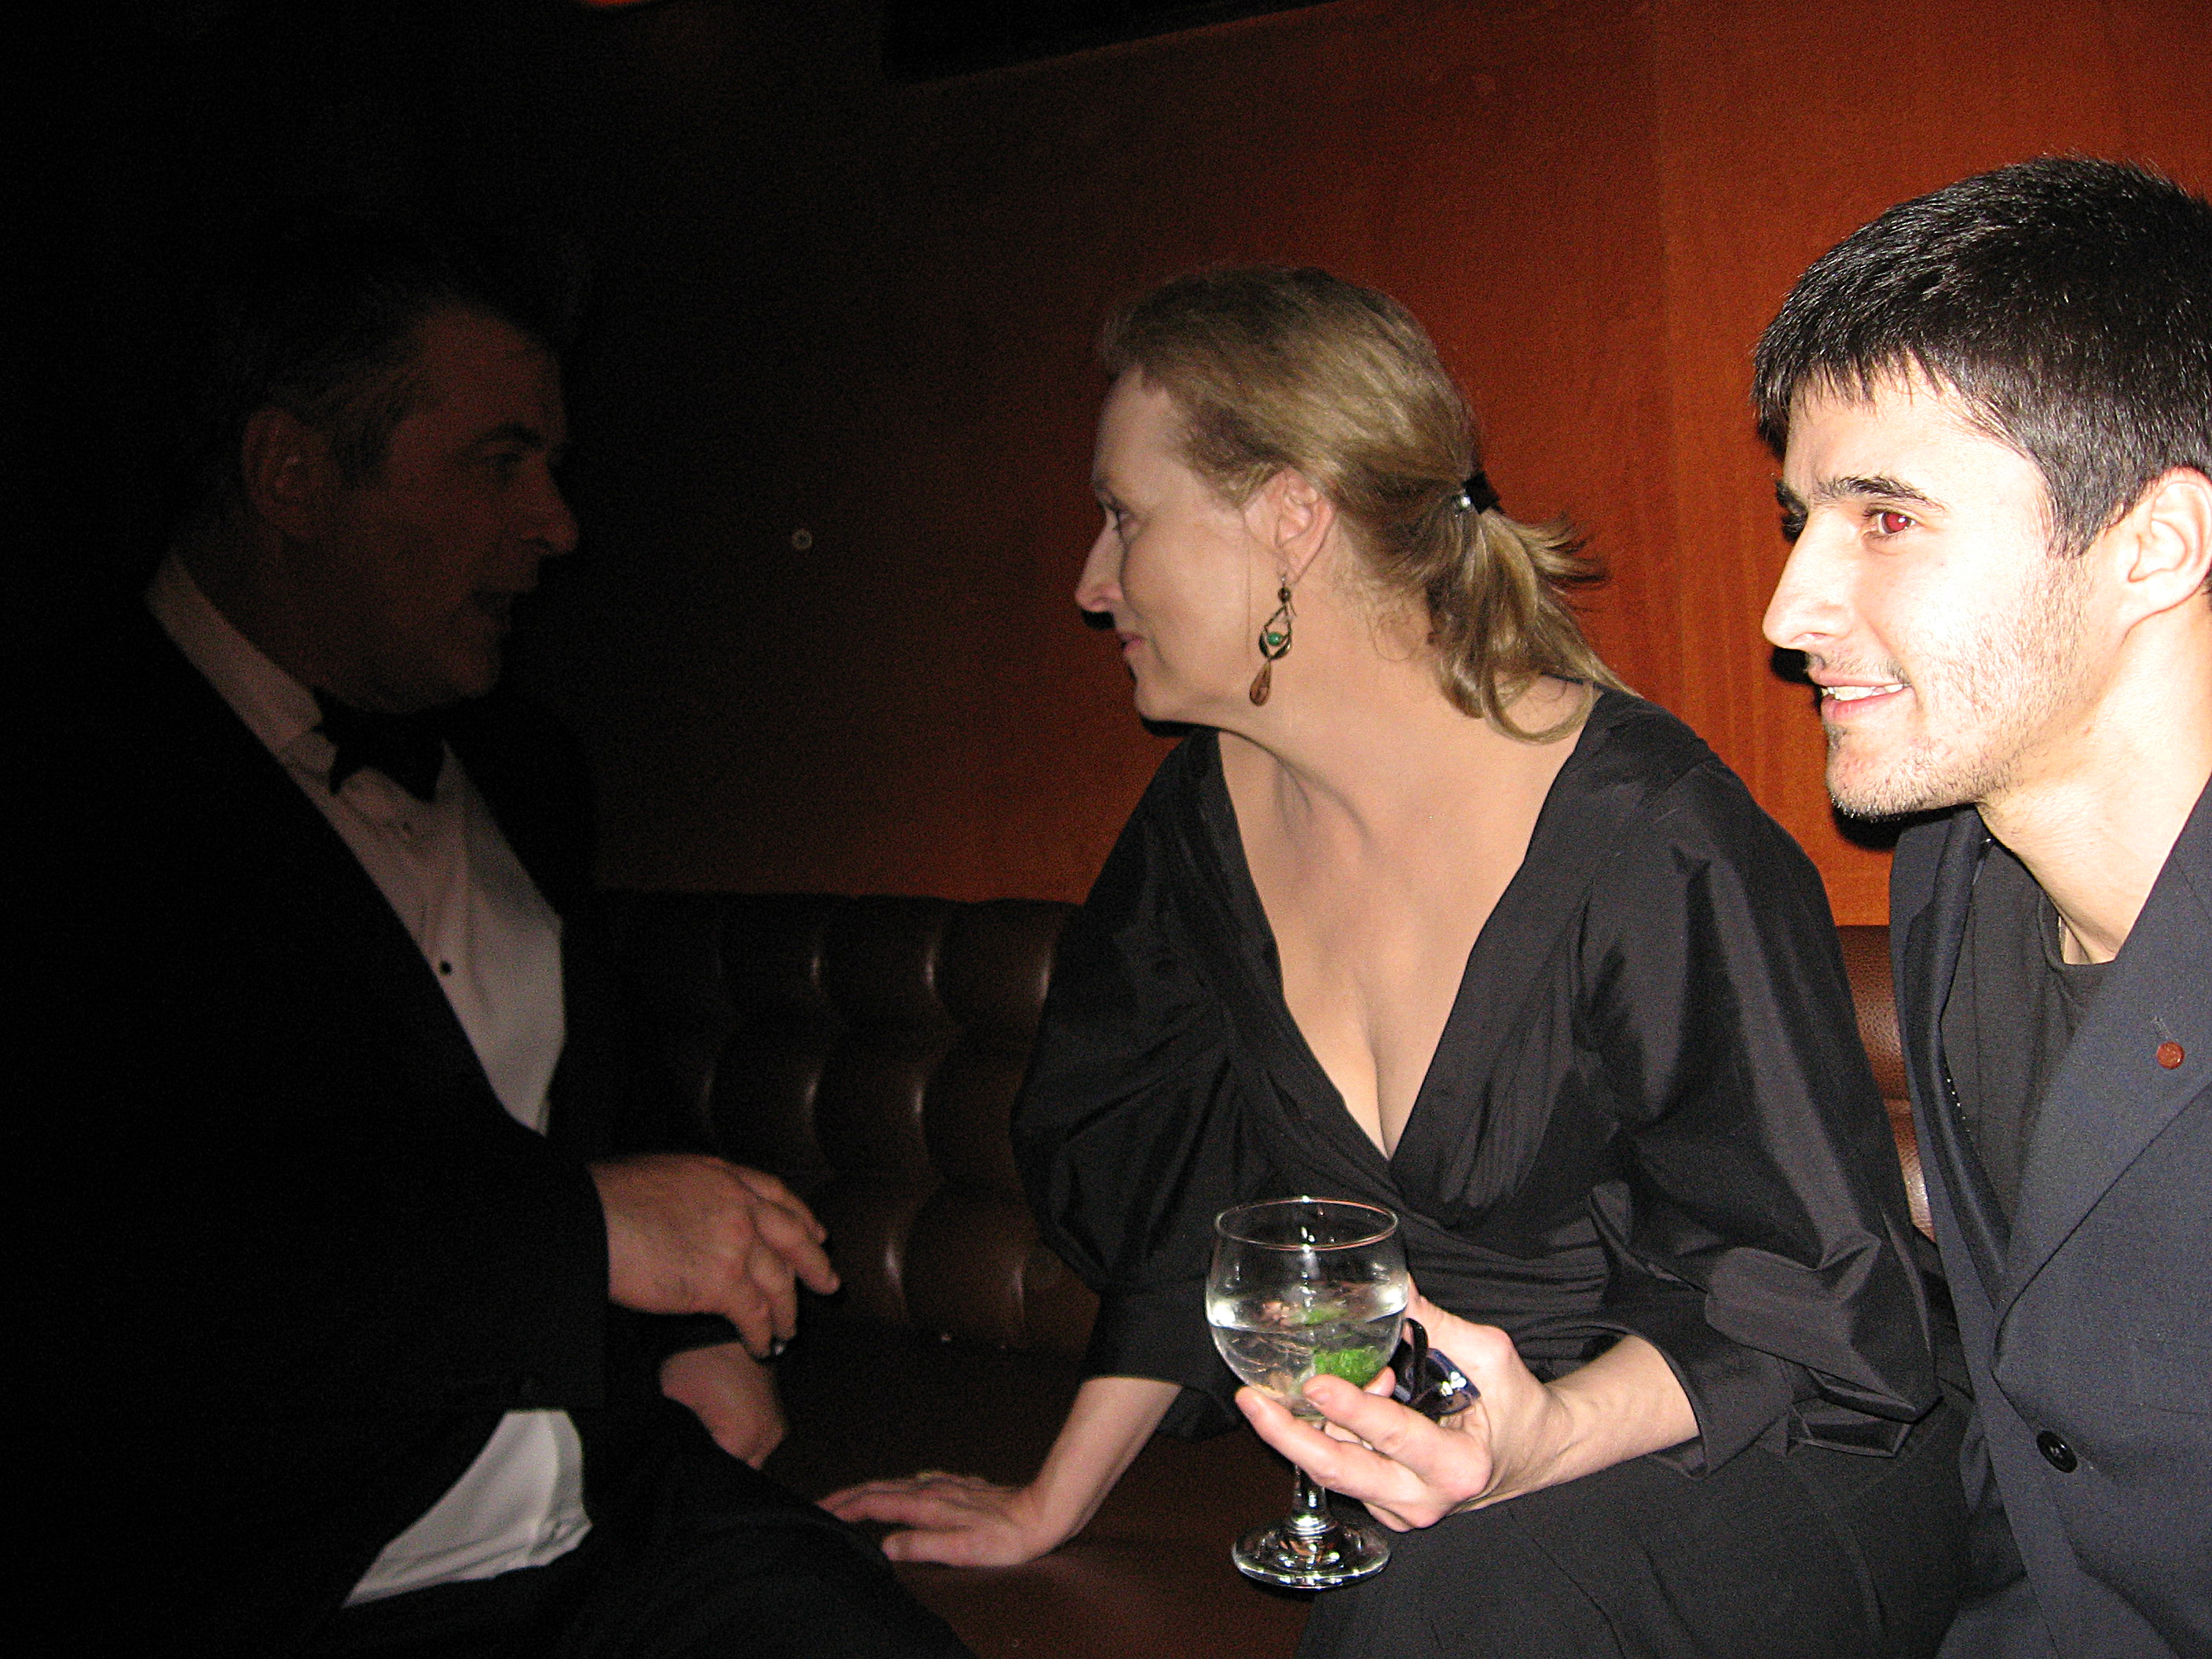 (L-R) Alec Baldwin, Meryl Streep and Josh Wood attend the 15th Annual Screen Actors Guild Awards cocktail party held at the Shrine Auditorium on January 25, 2009 in Los Angeles, California.